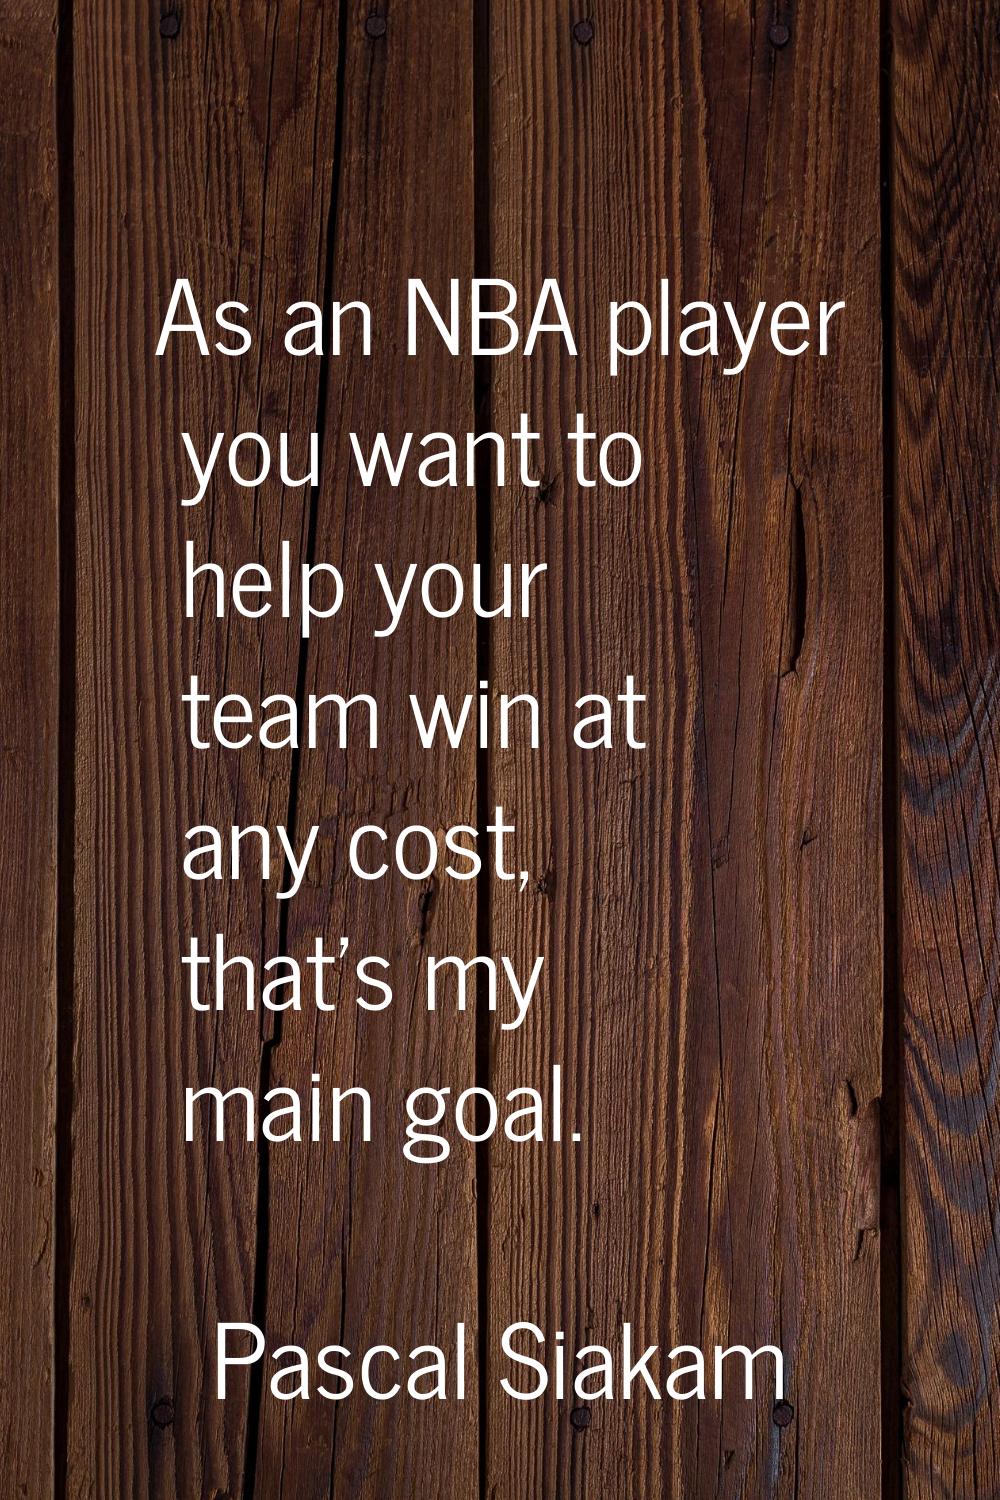 As an NBA player you want to help your team win at any cost, that's my main goal.